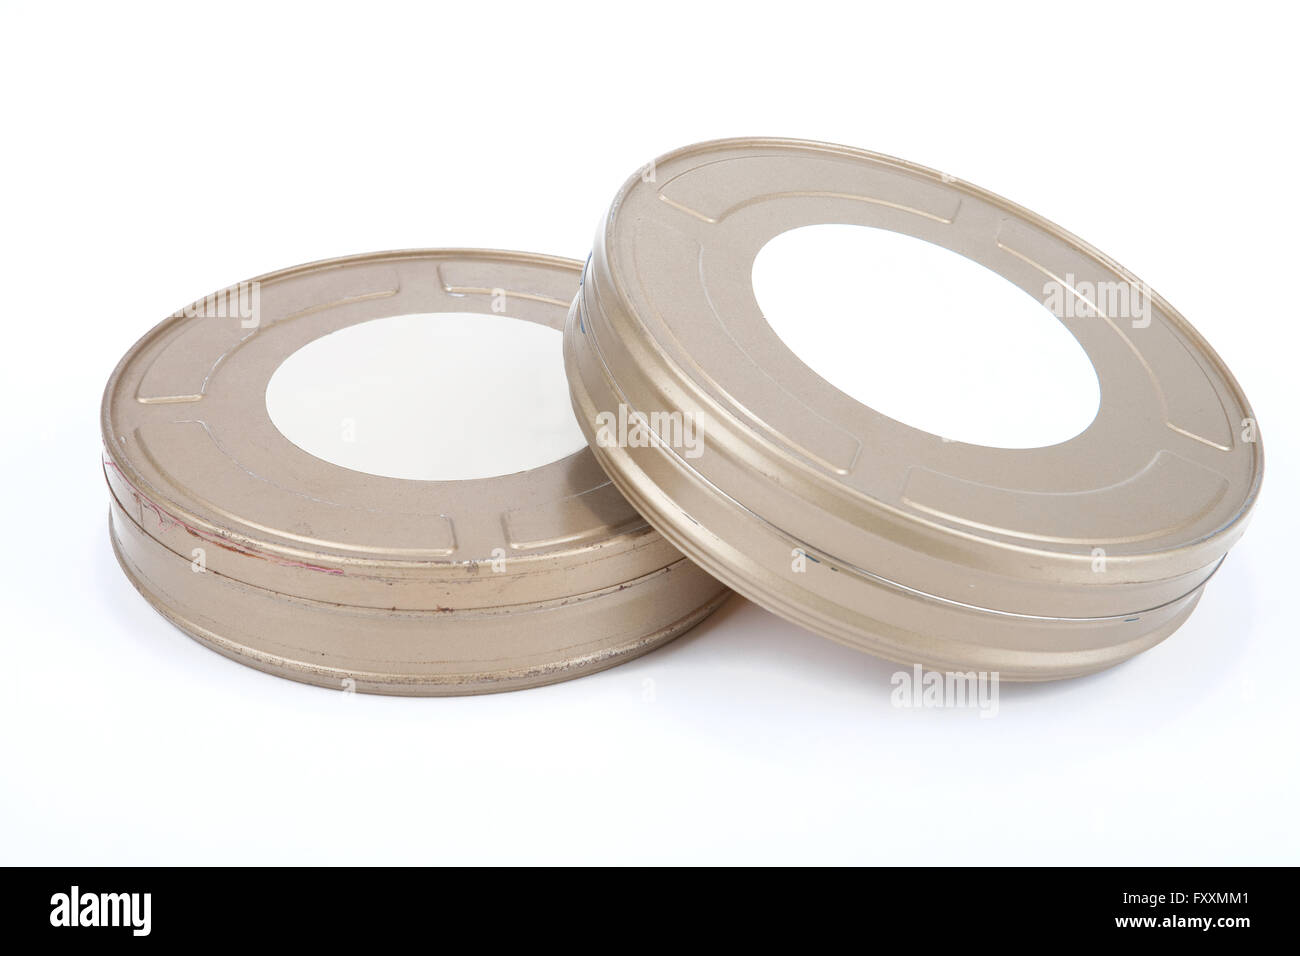 Movie film canister Cut Out Stock Images & Pictures - Page 2 - Alamy